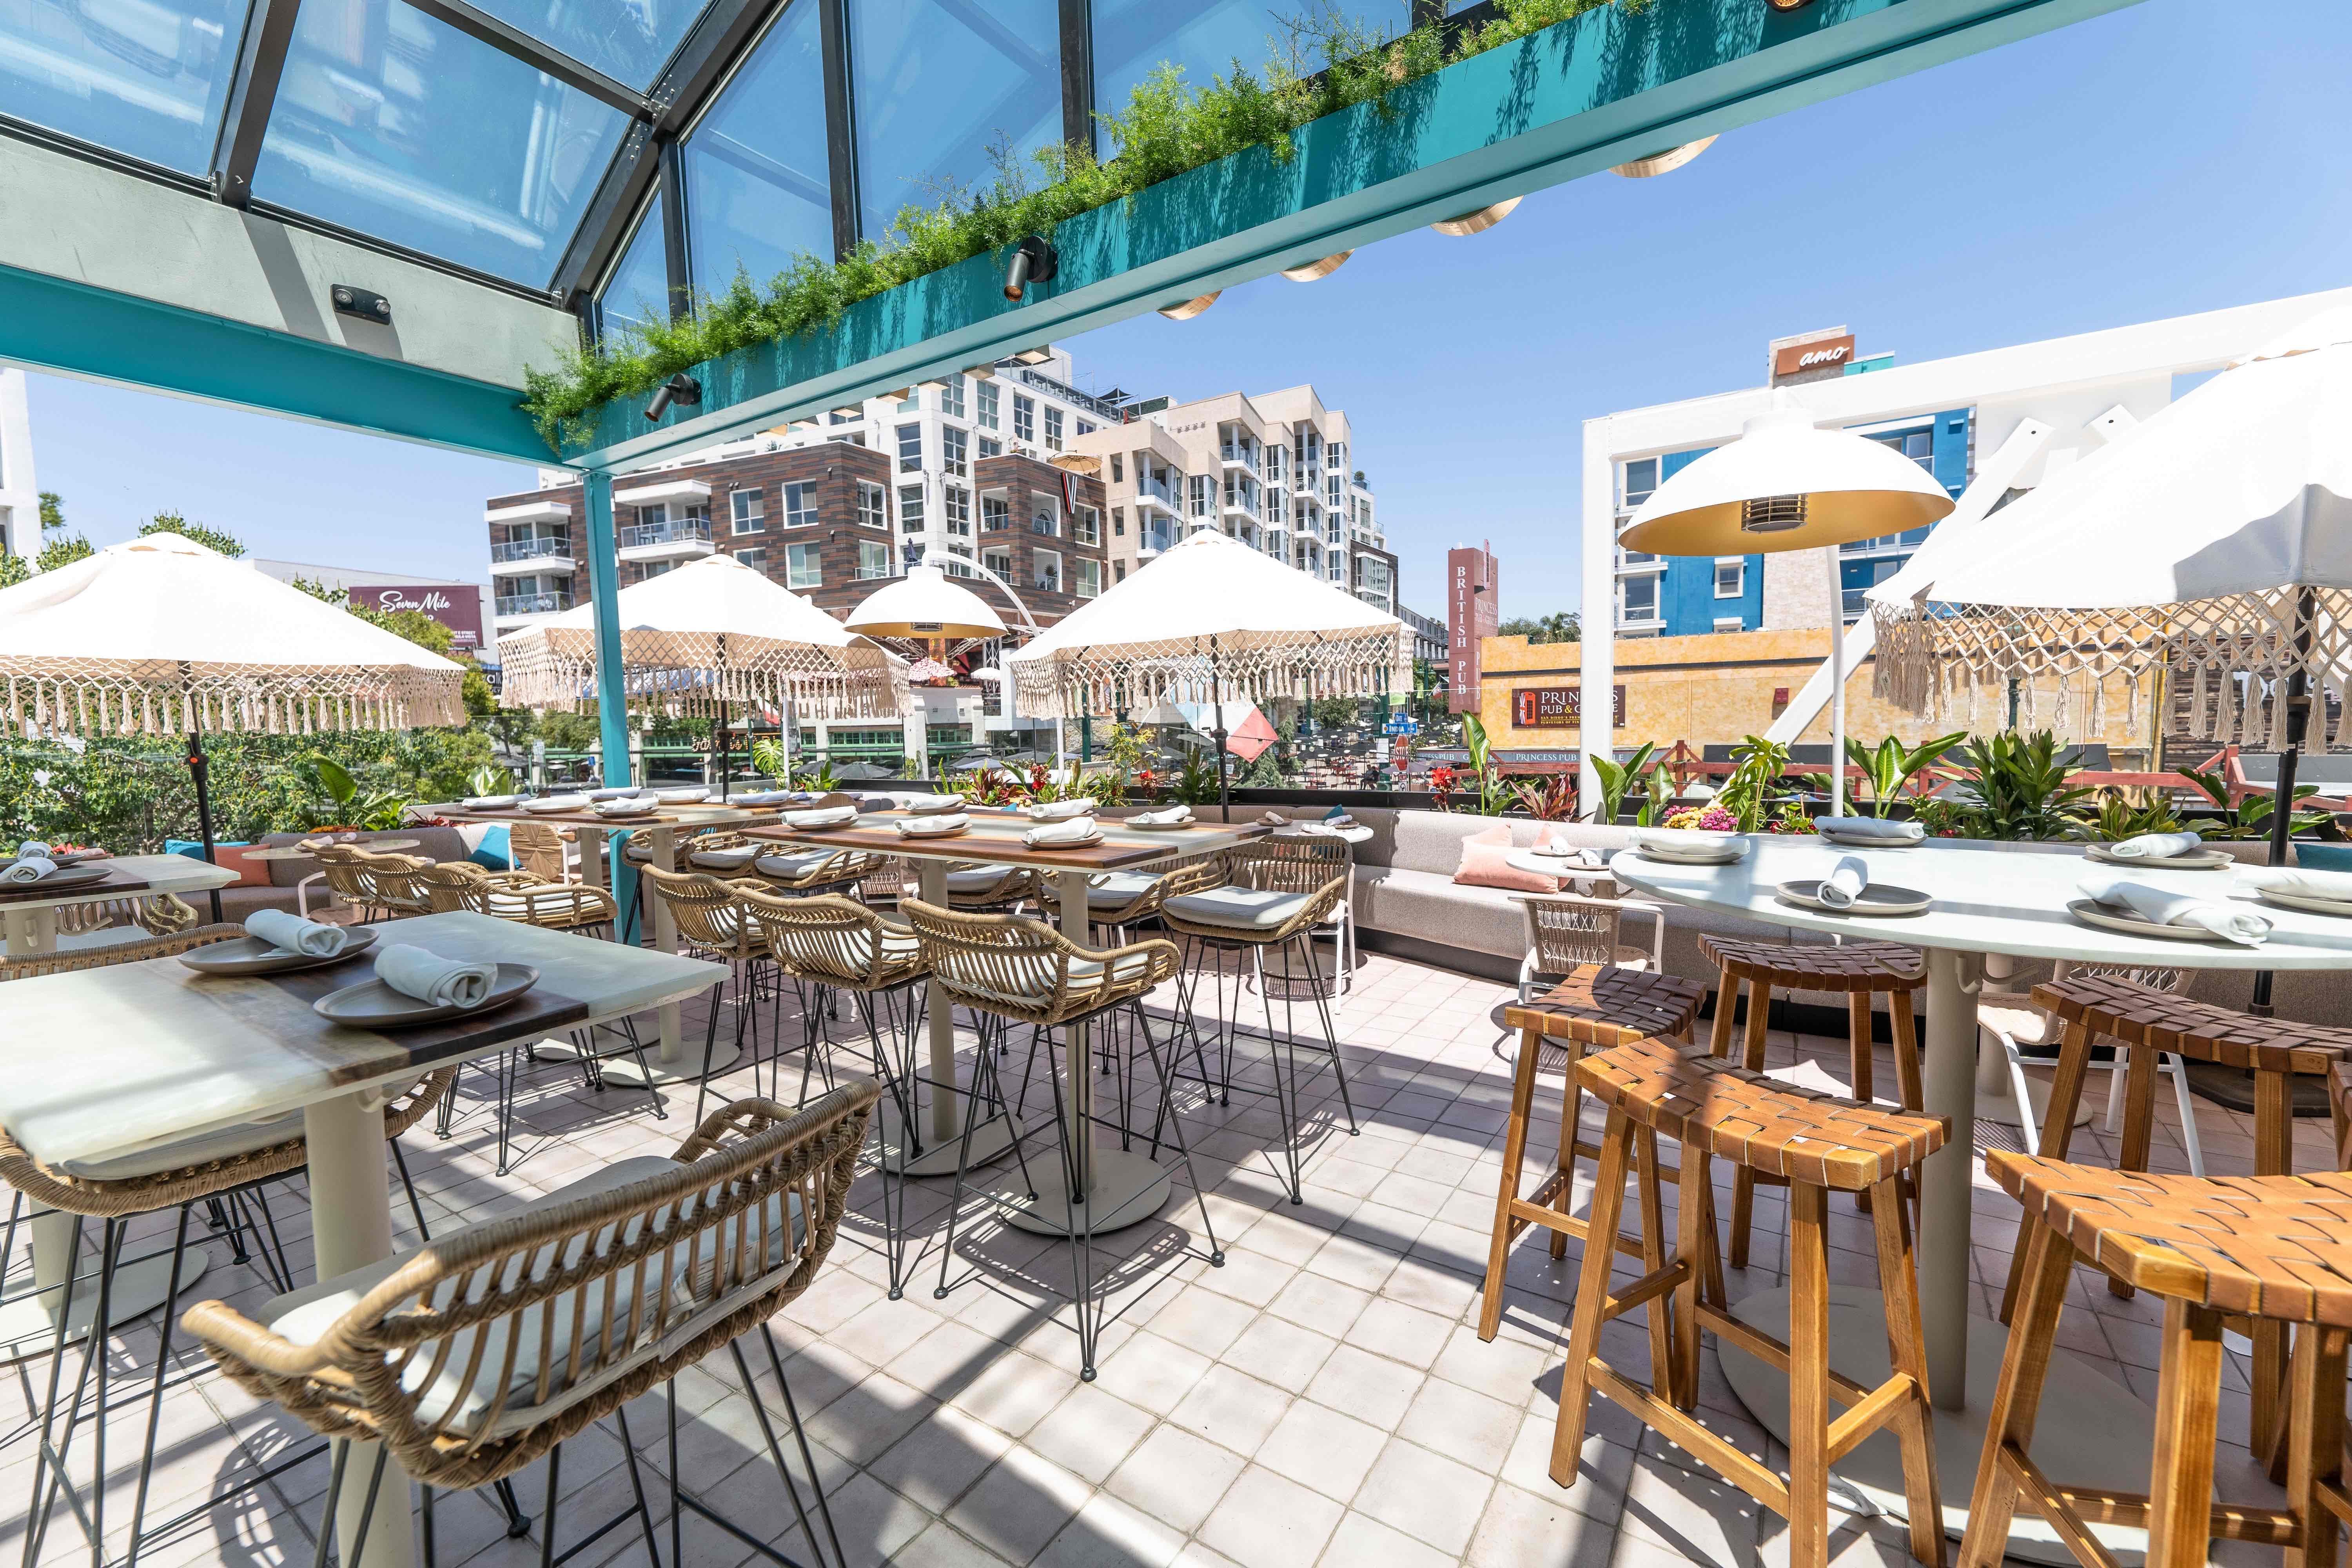 Caribbean-inspired rooftop bar with high-top tables an umbrellas on a sun day in a city.